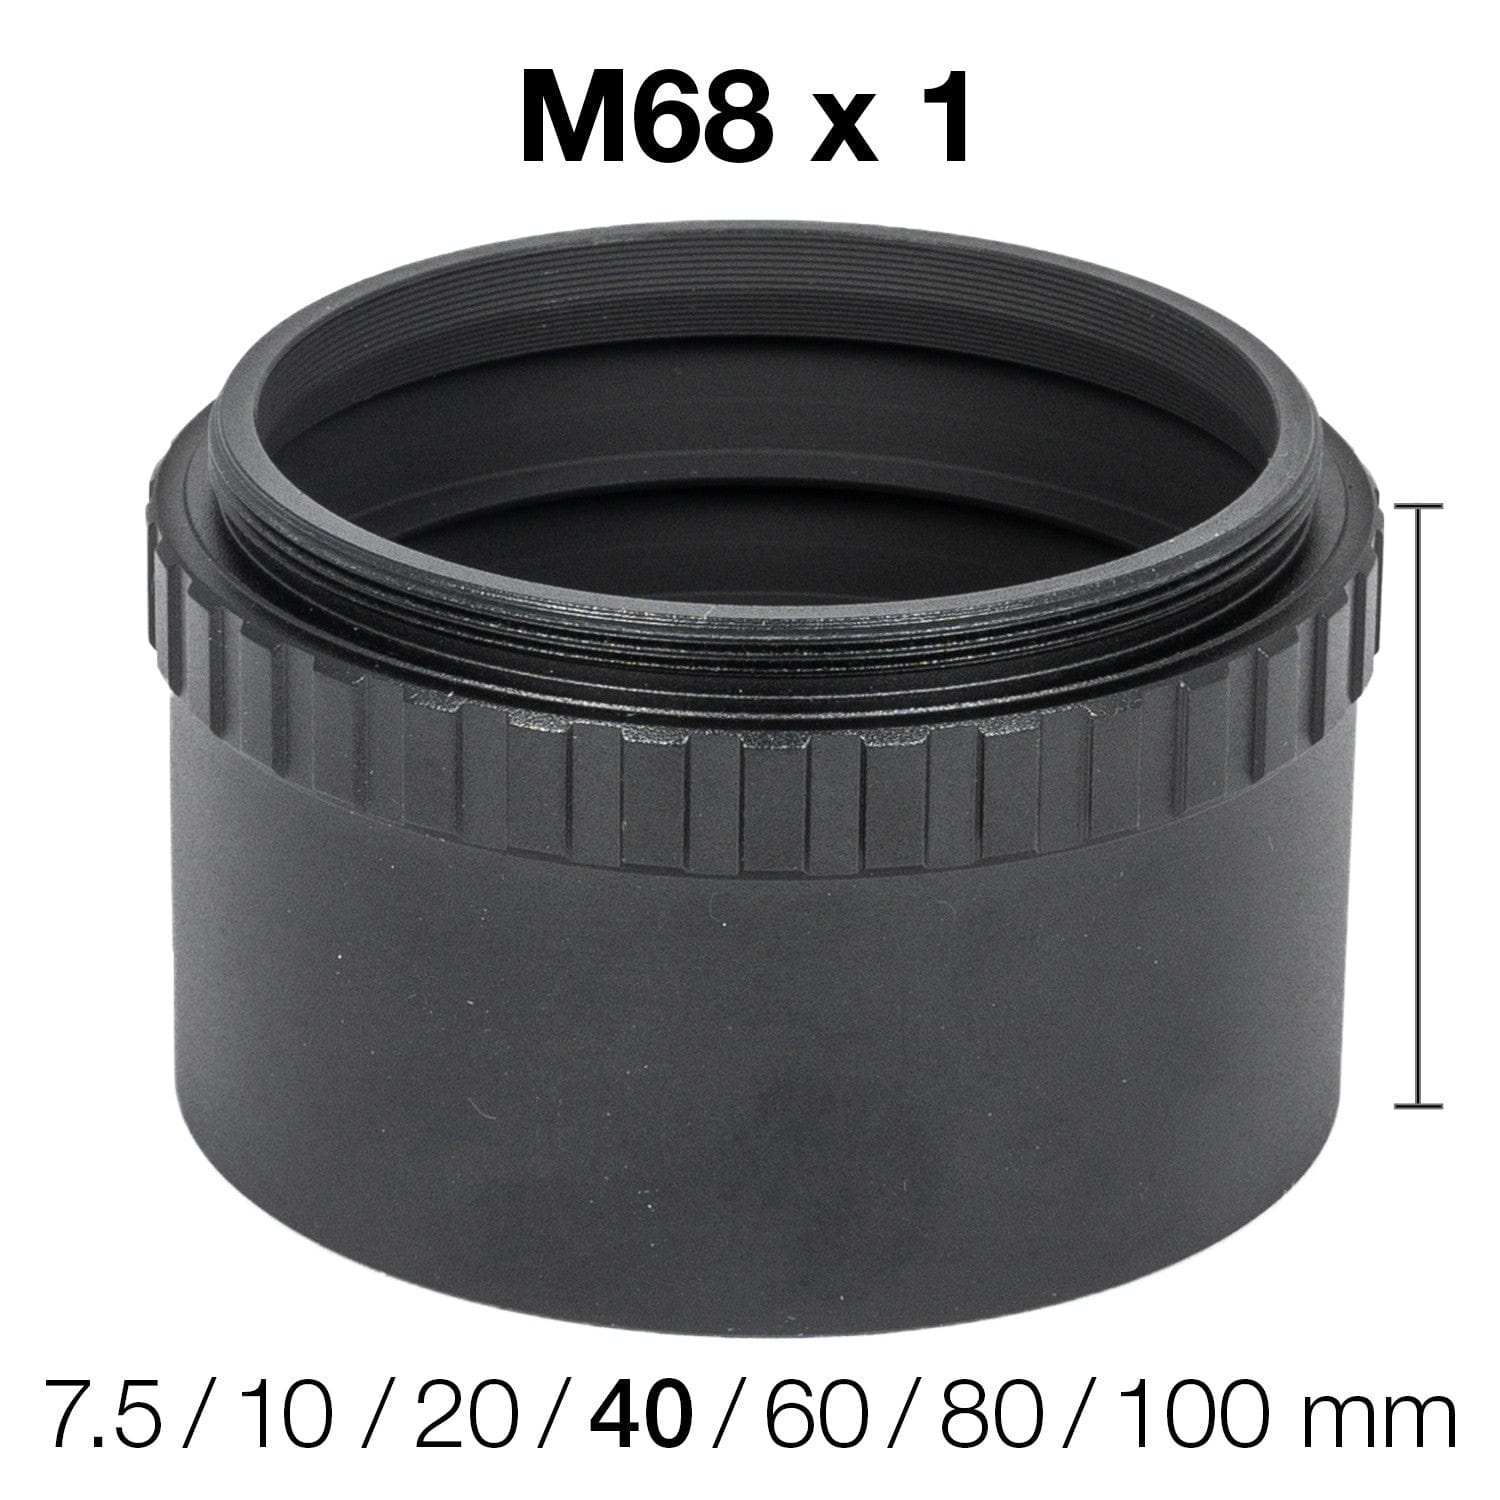 Baader Planetarium Accessory Baader M68 Extension Tube, 20mm Long - 2458202